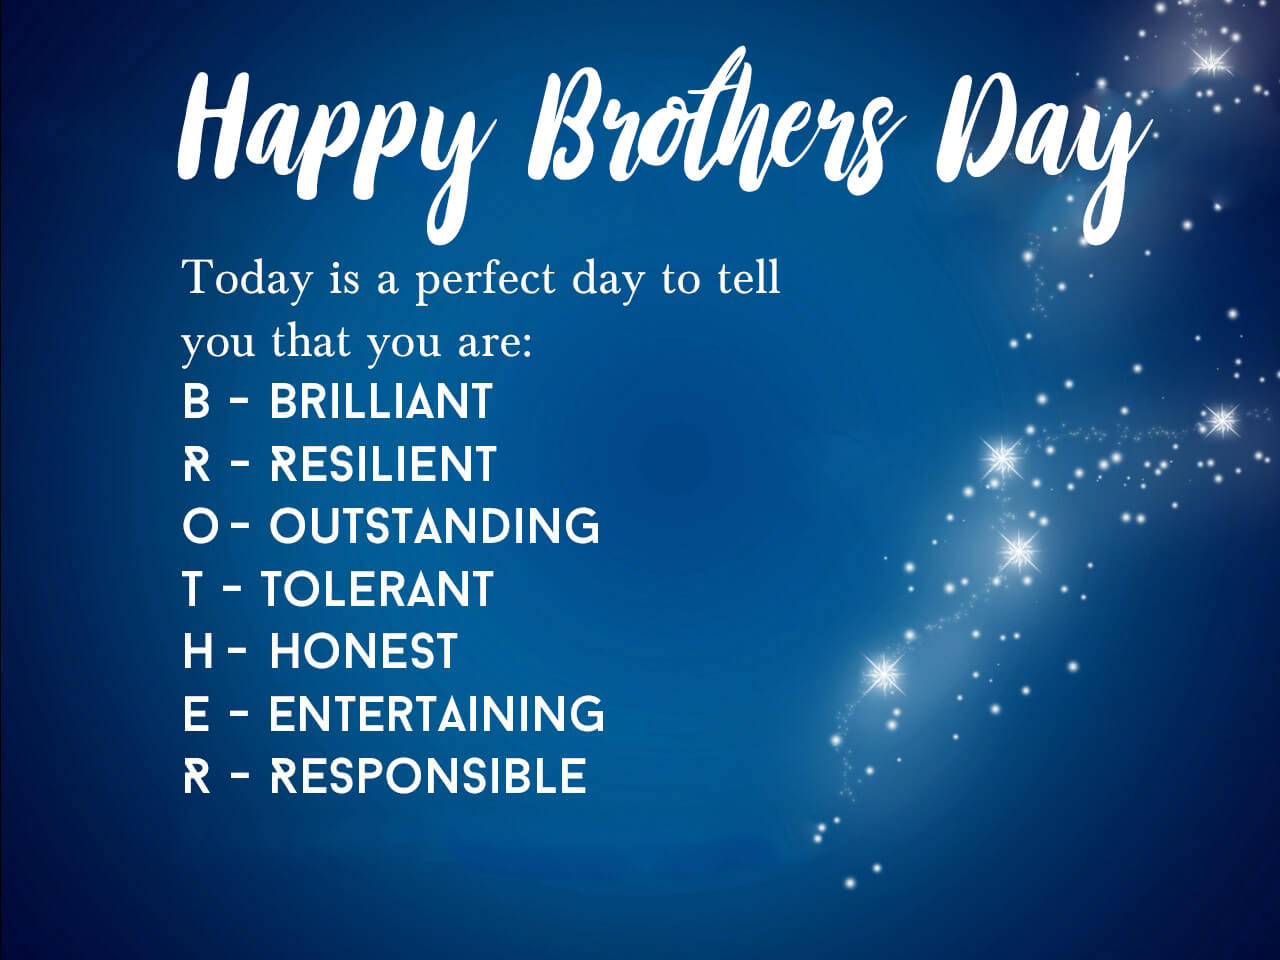 31+] Happy Brother's Day Wallpapers - WallpaperSafari